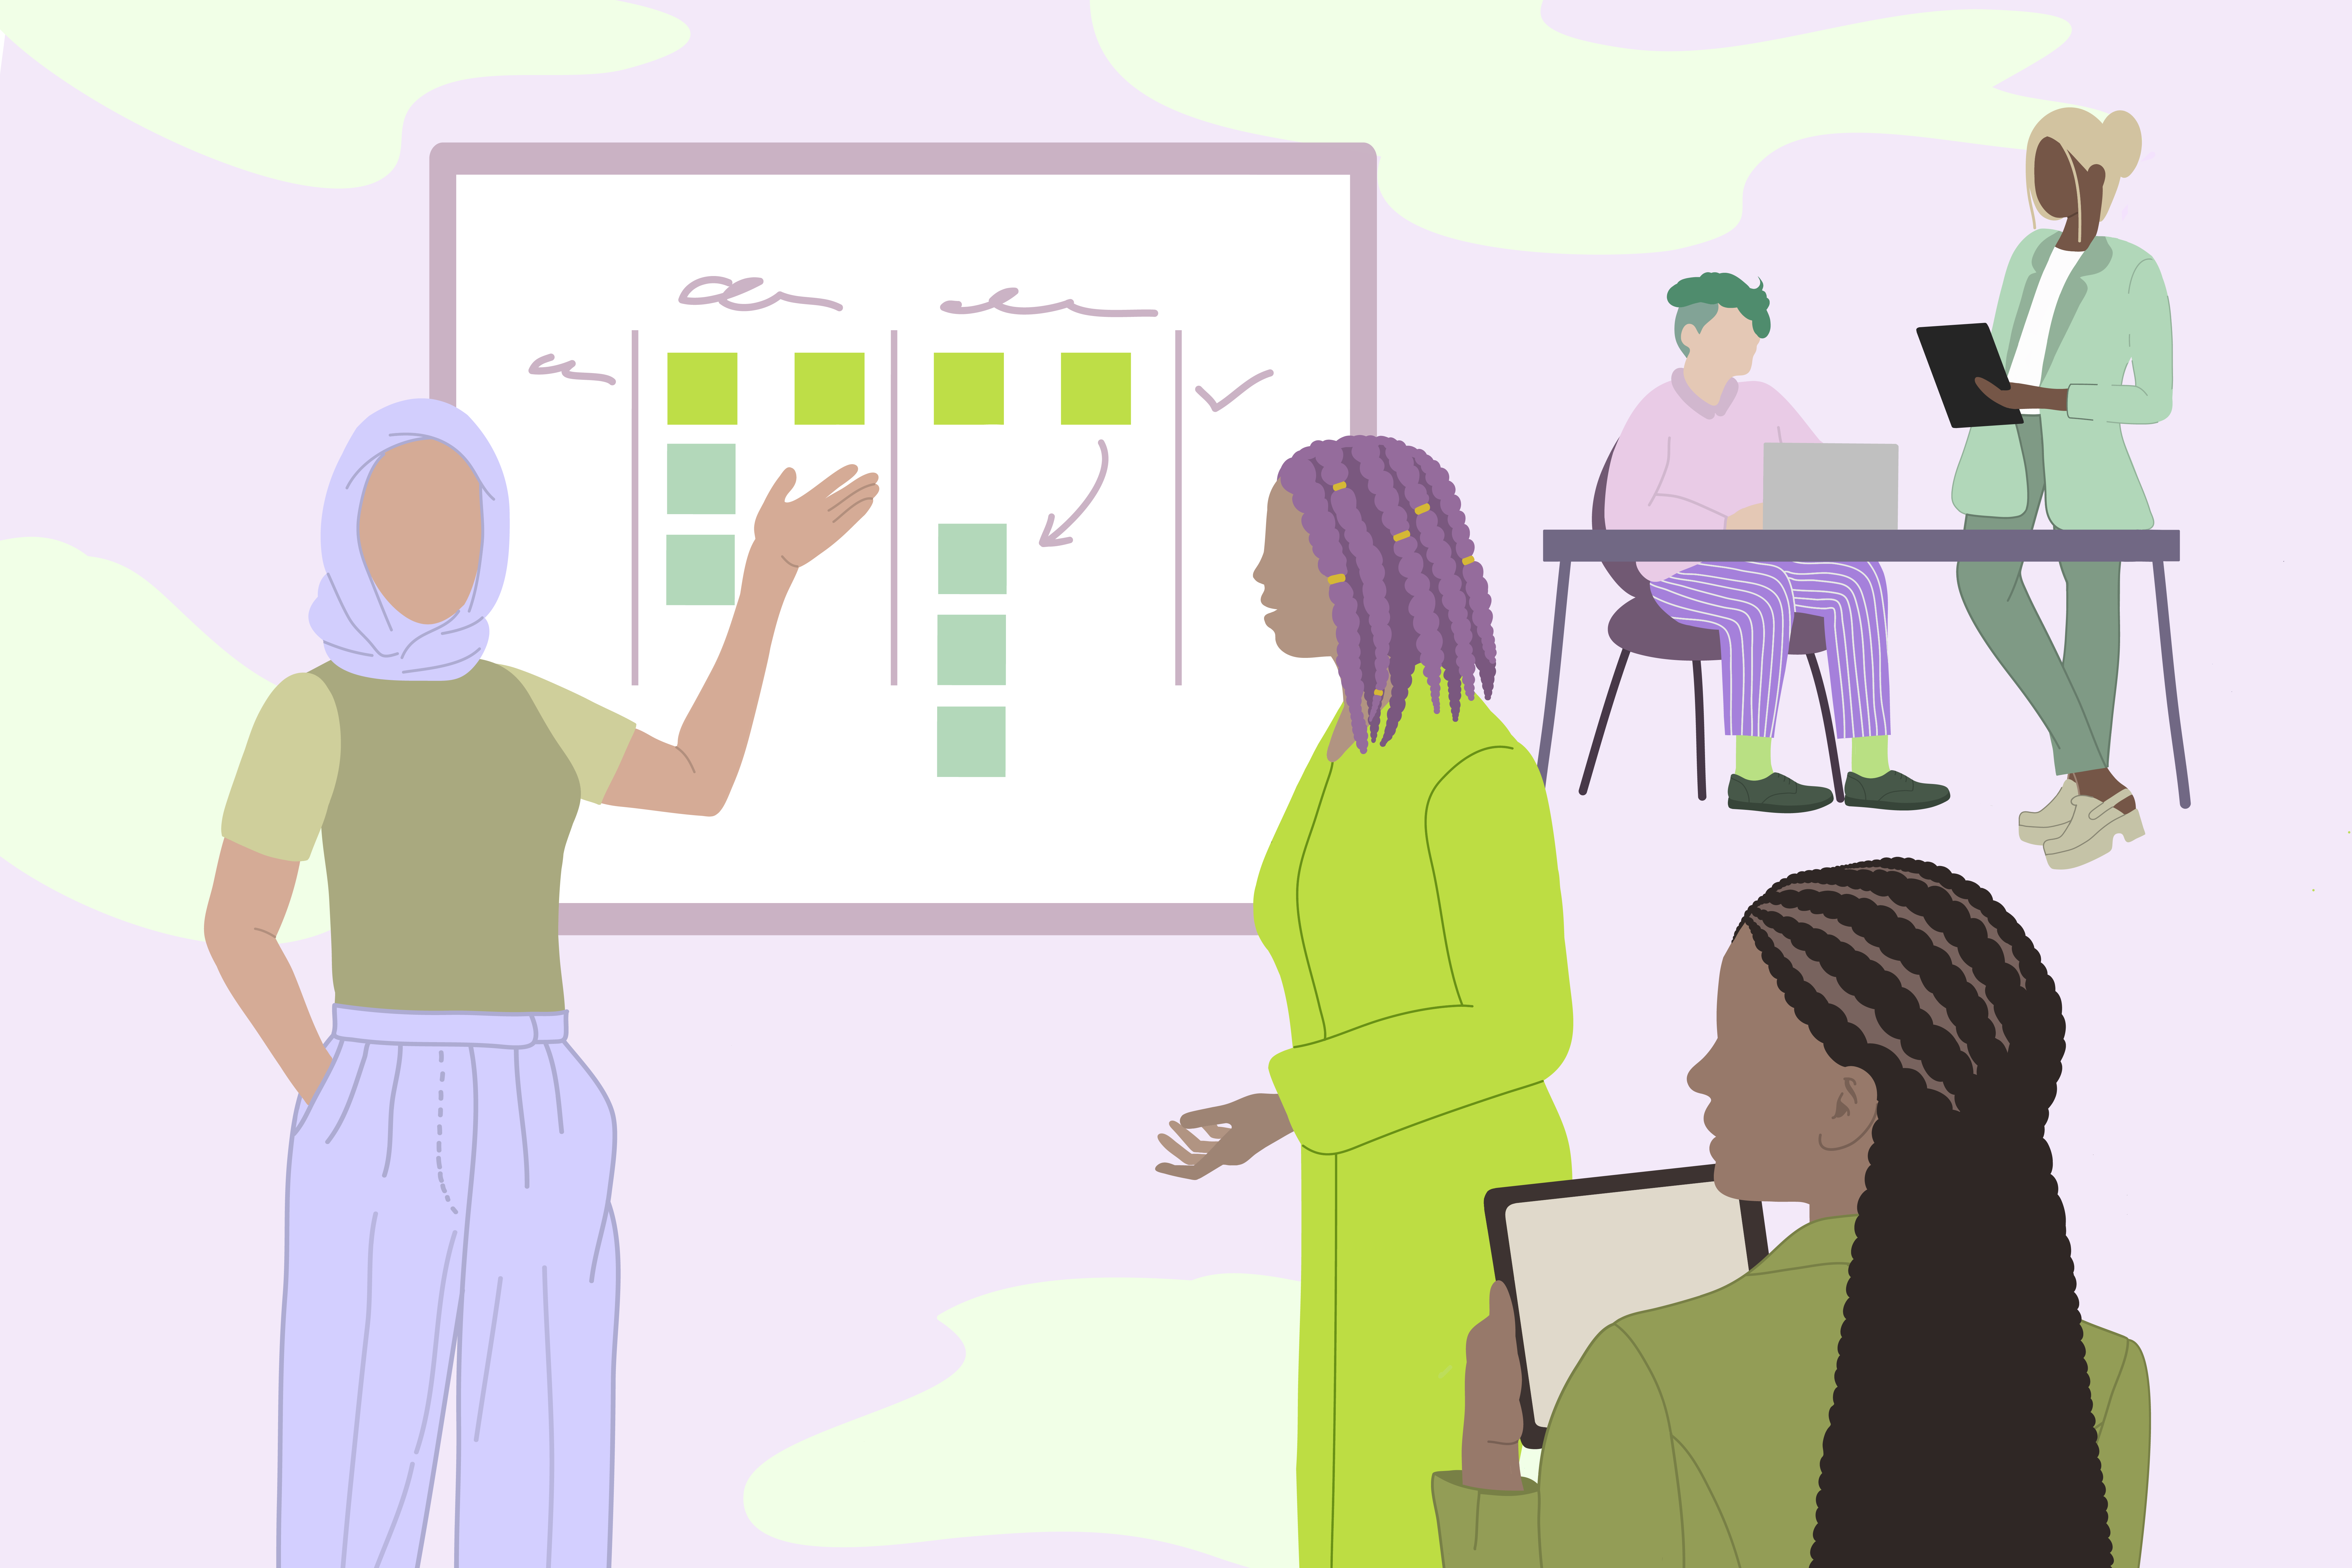 Illustration of five women and non-binary people working together using a whiteboard, working on laptops and speaking. 